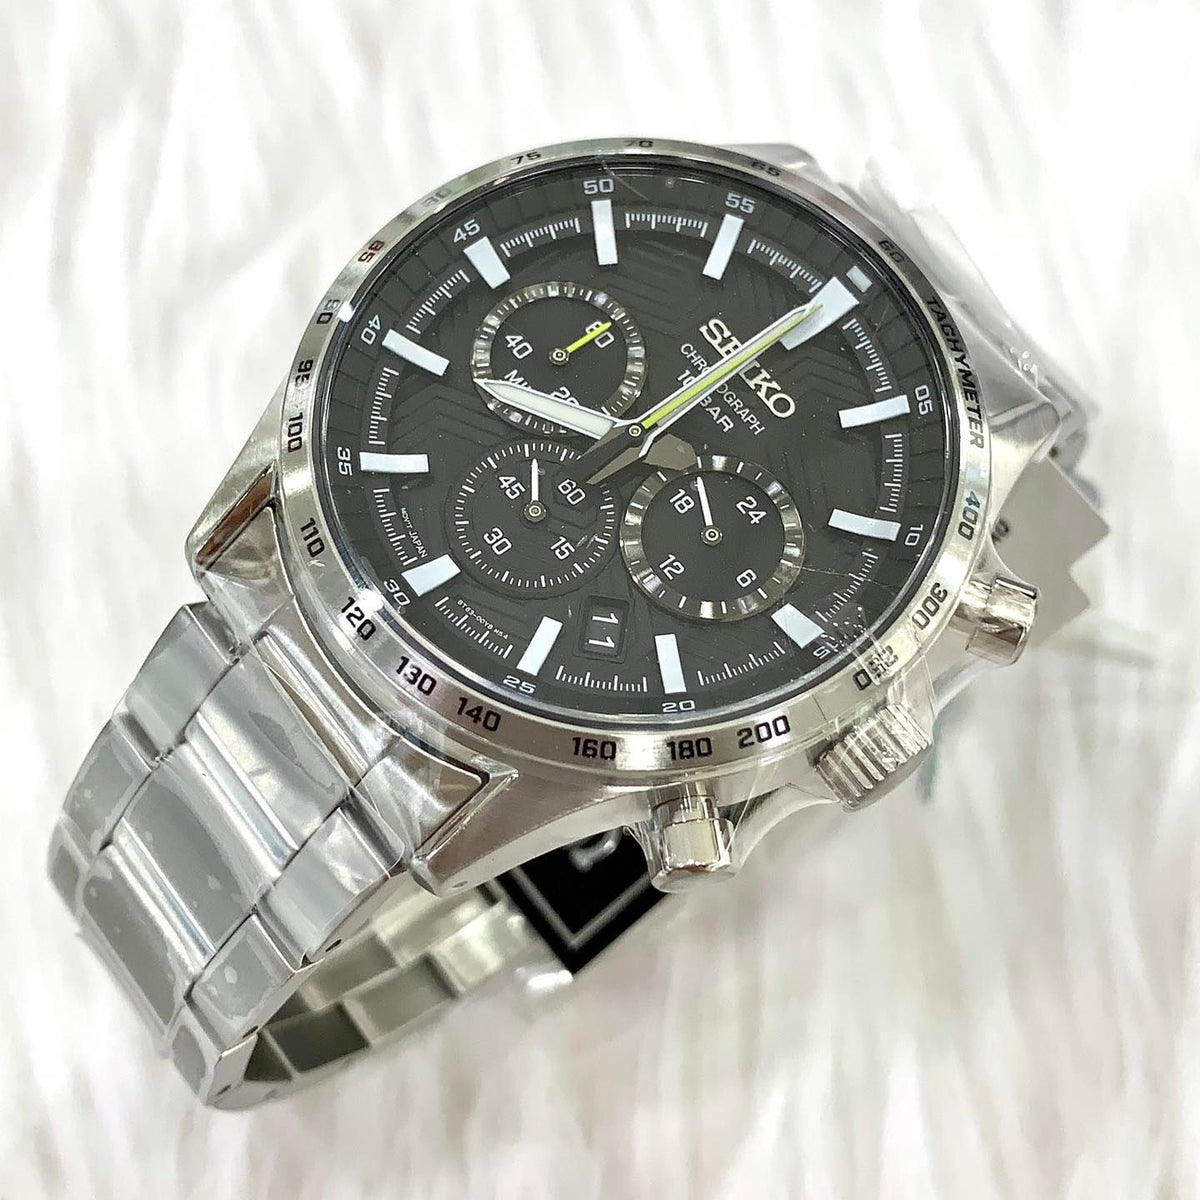 Seiko SSB413P1 Chronograph – Great Time Offical